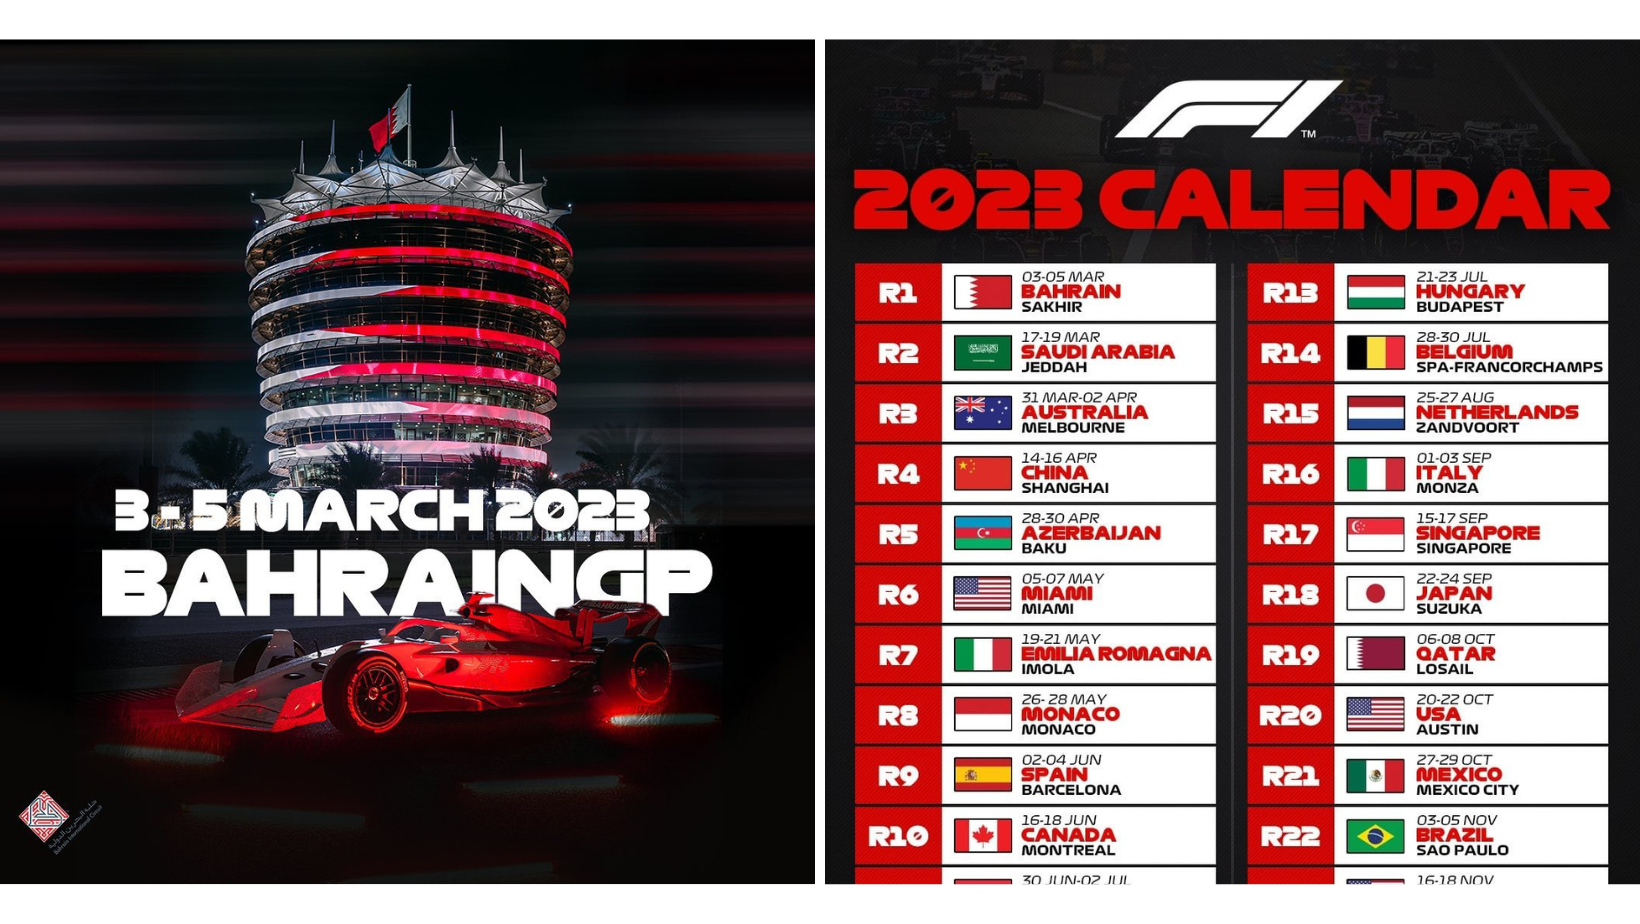 F1 2023 Race Calendar Has Just Been Released & Bahrain Is Scheduled to